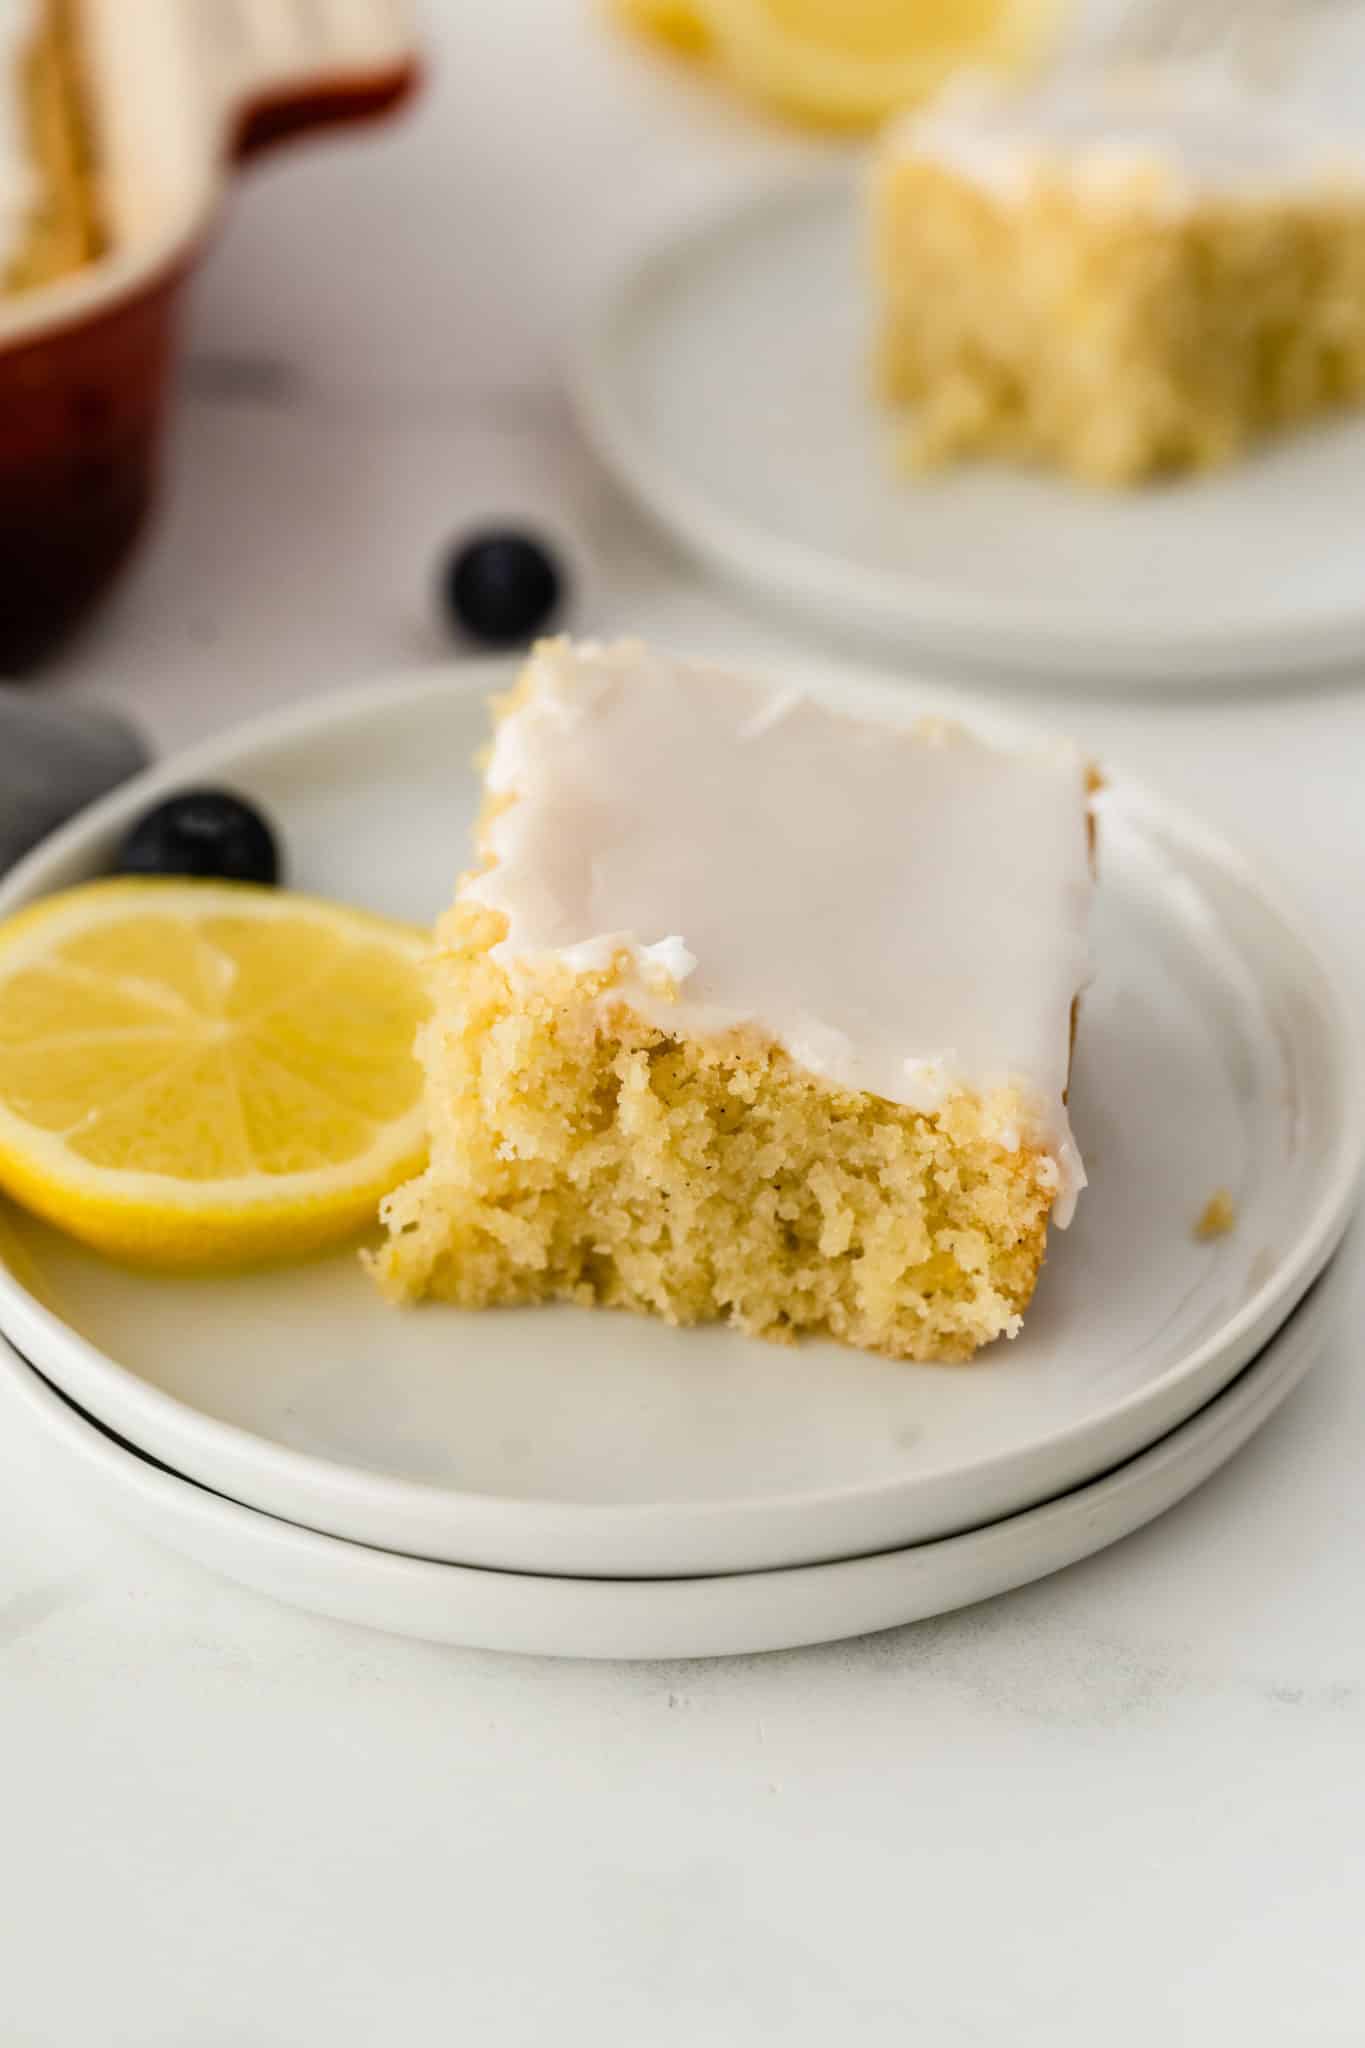 slice of lemon cake with icing on top served with a piece of fresh lemon